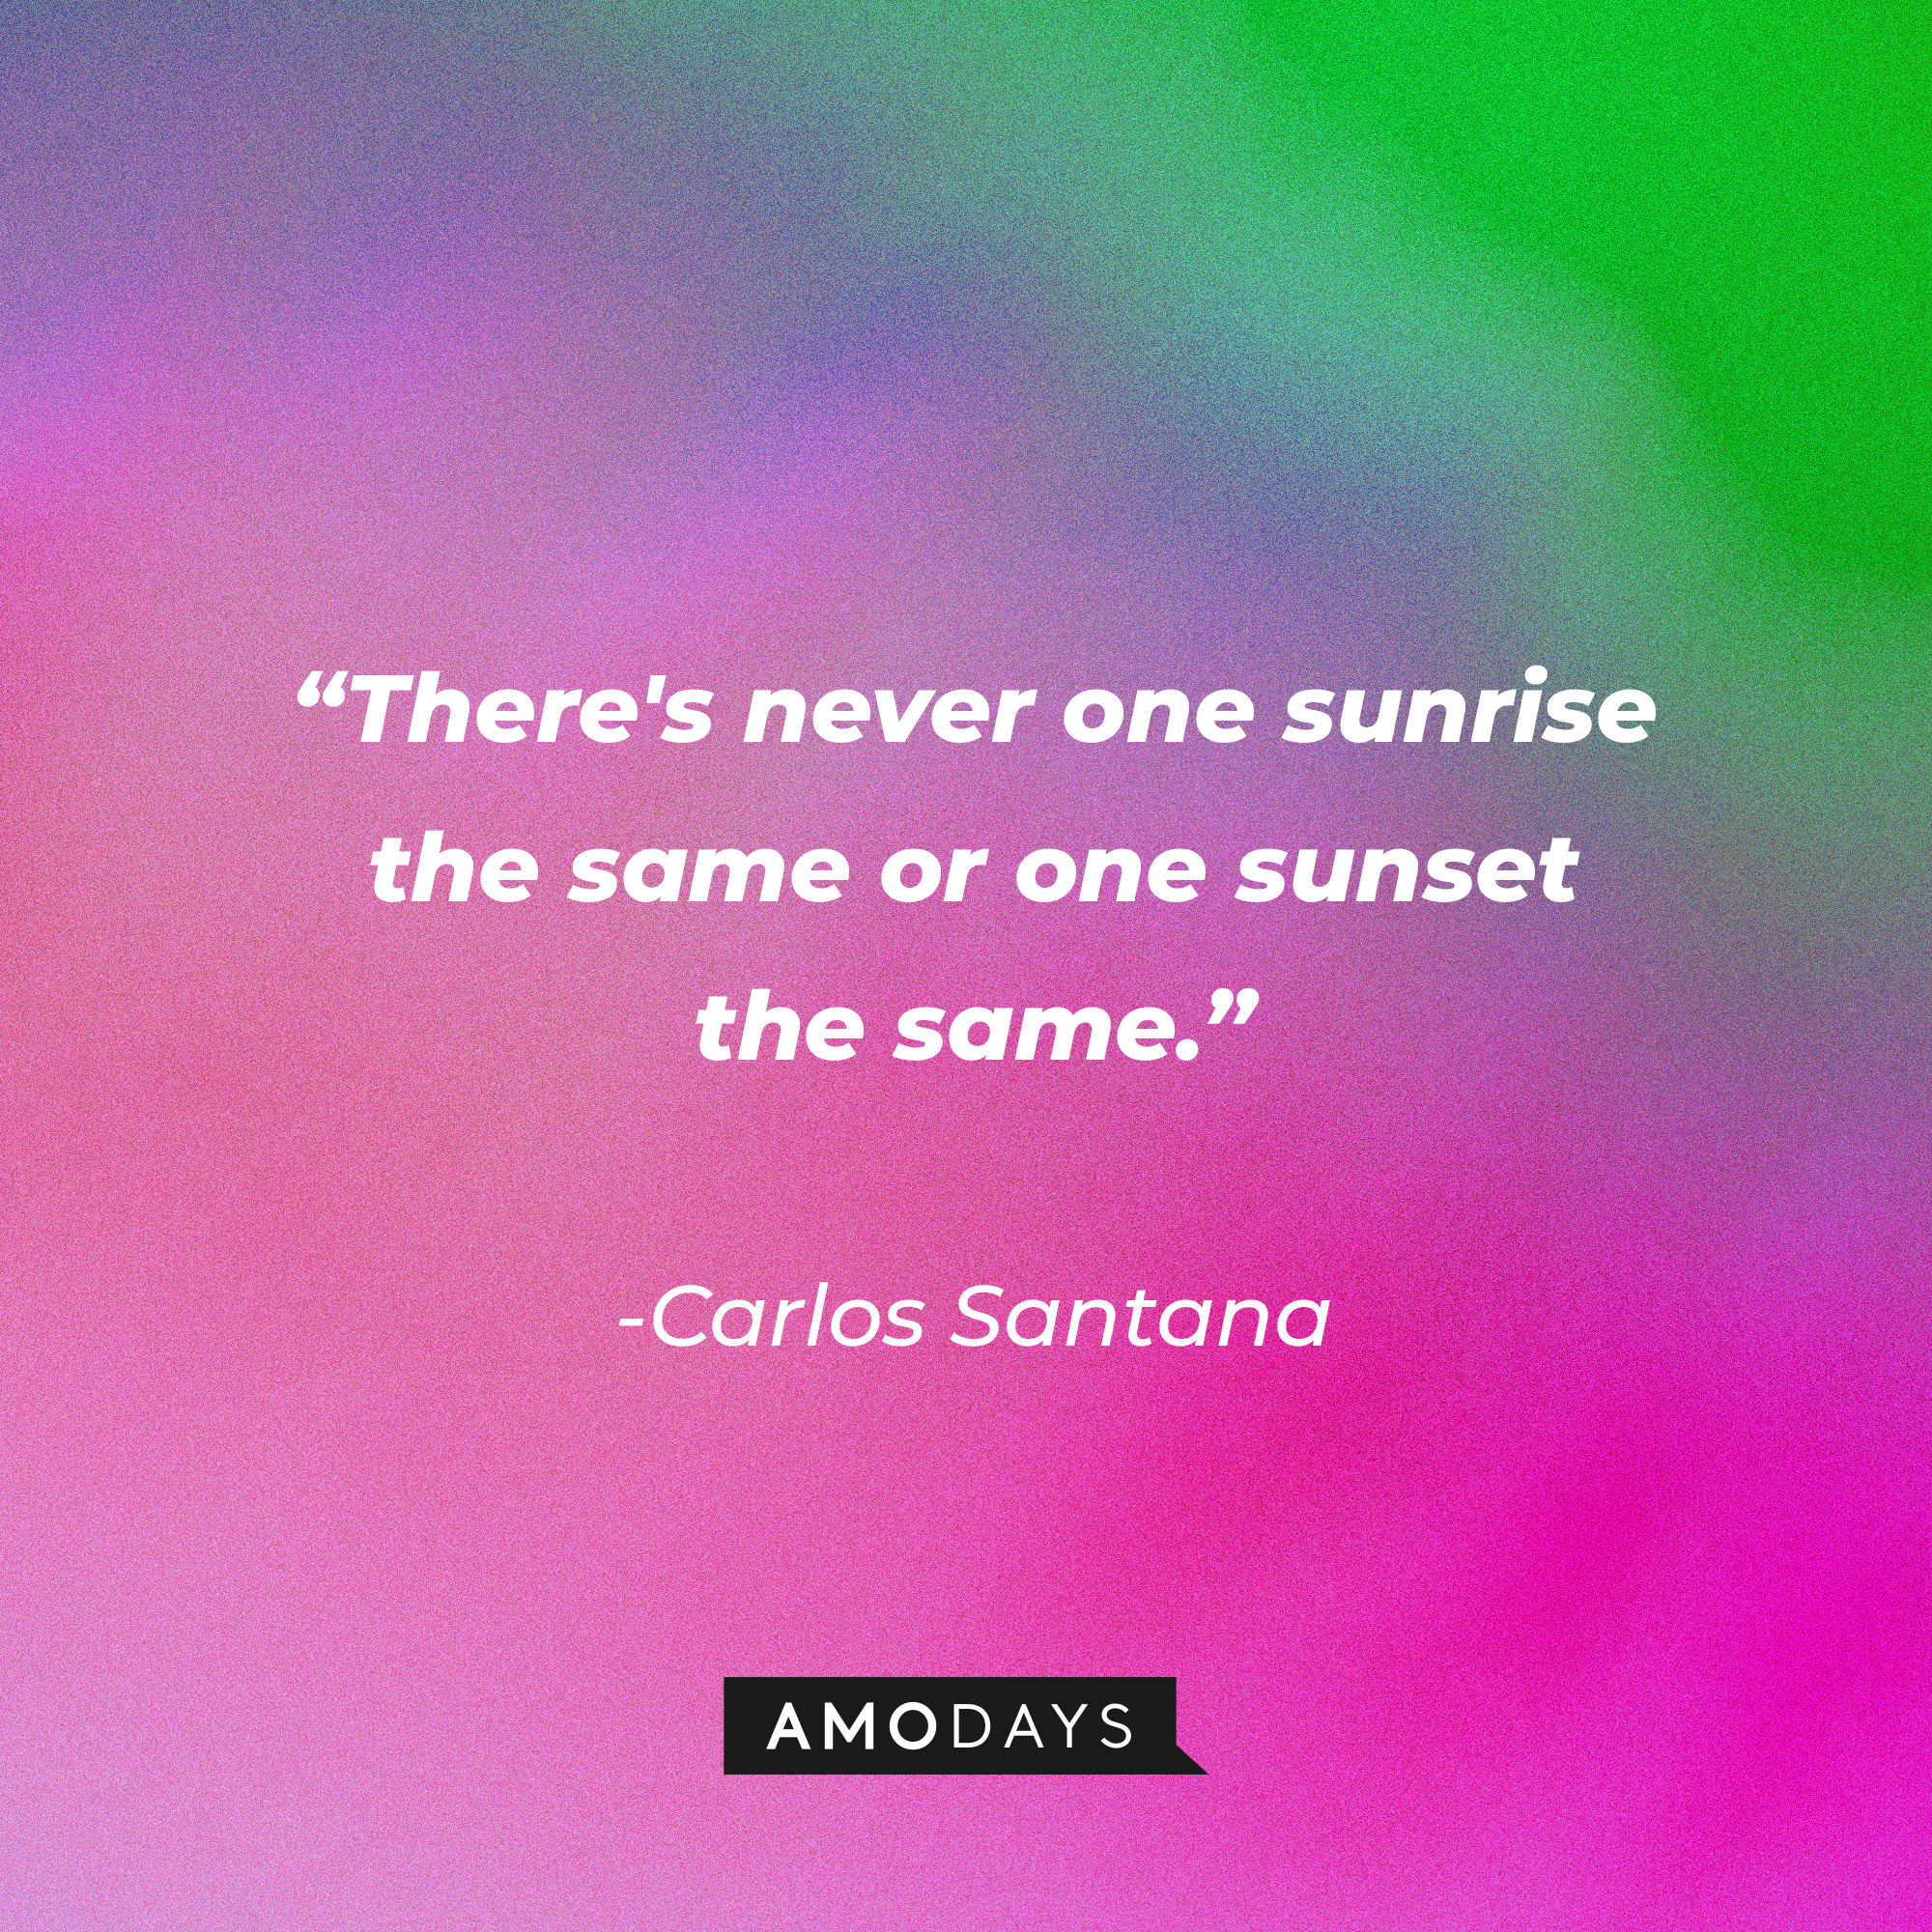 Carlos Santana’s quote: “There's never one sunrise the same or one sunset the same.” ┃Source: AmoDays